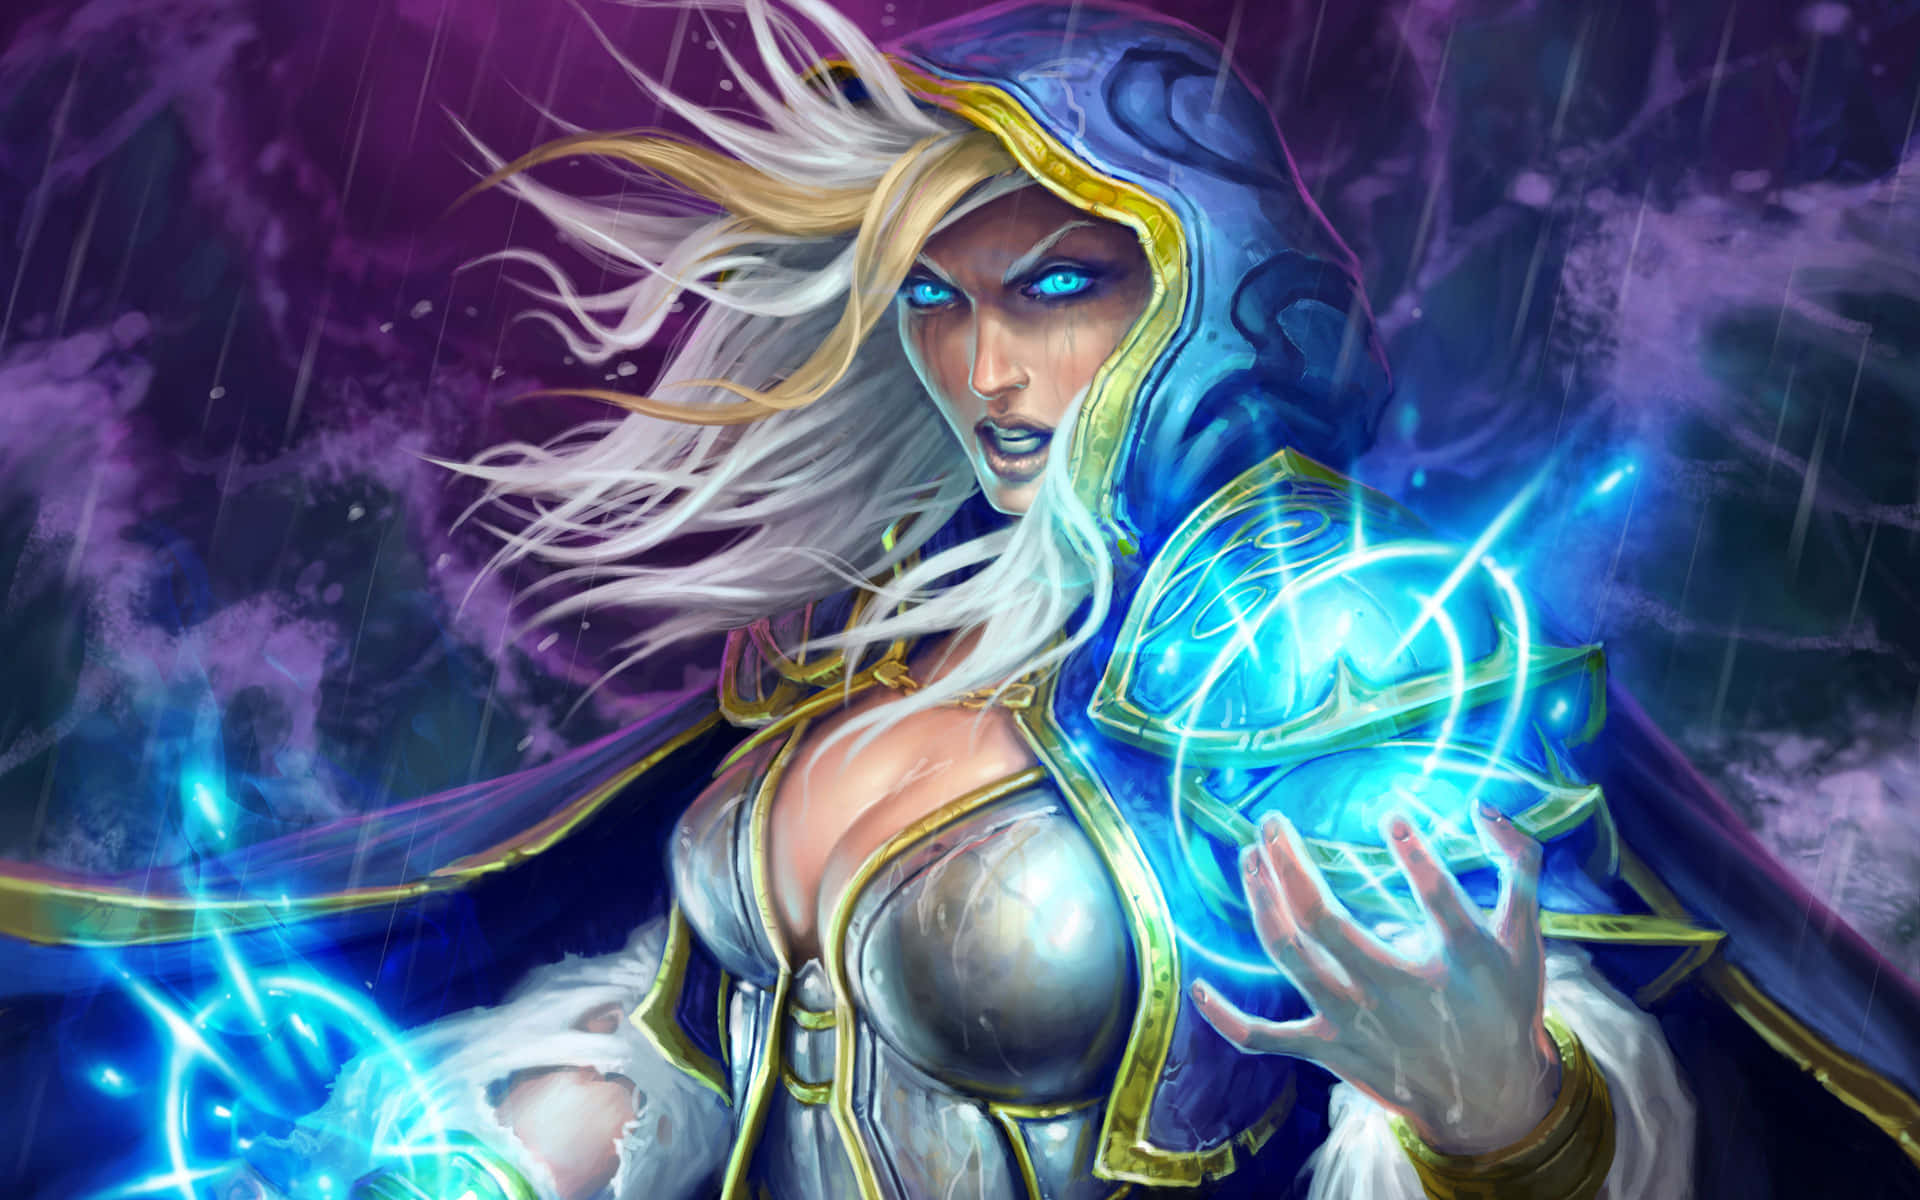 Enjoy the best of HD Hearthstone with this stunning HD wallpaper